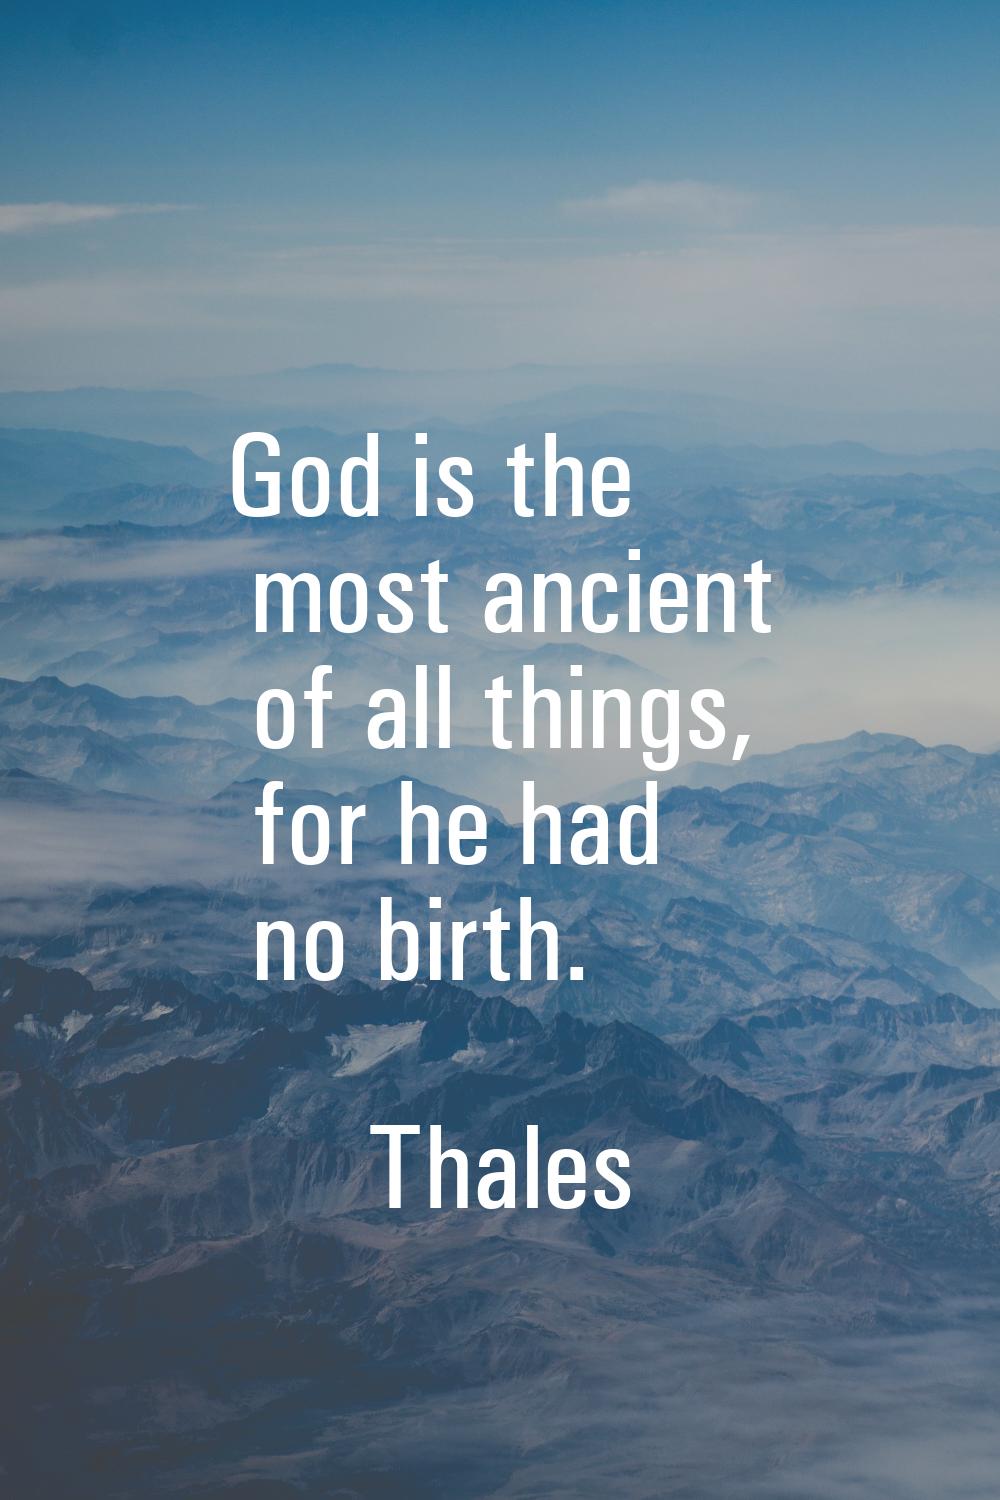 God is the most ancient of all things, for he had no birth.